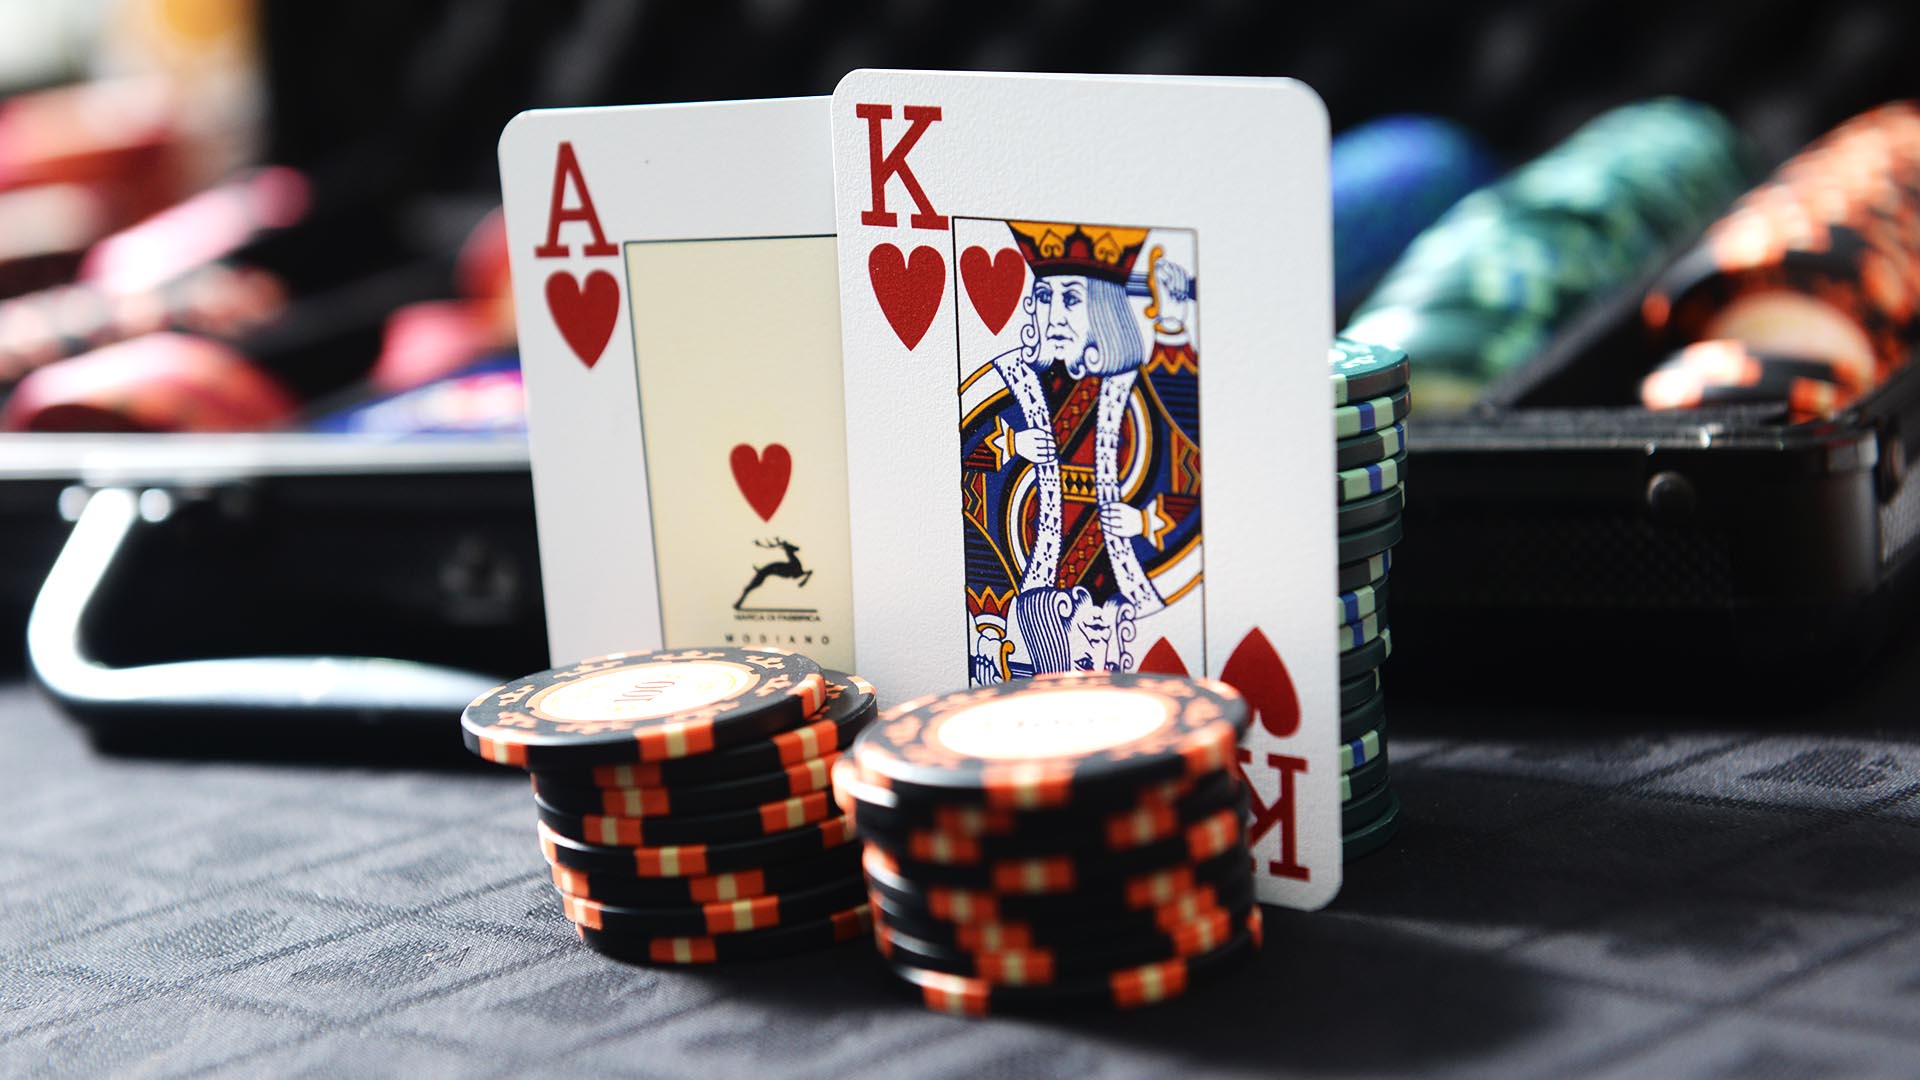 Use these strategies to gain the upper hand in online poker gaming